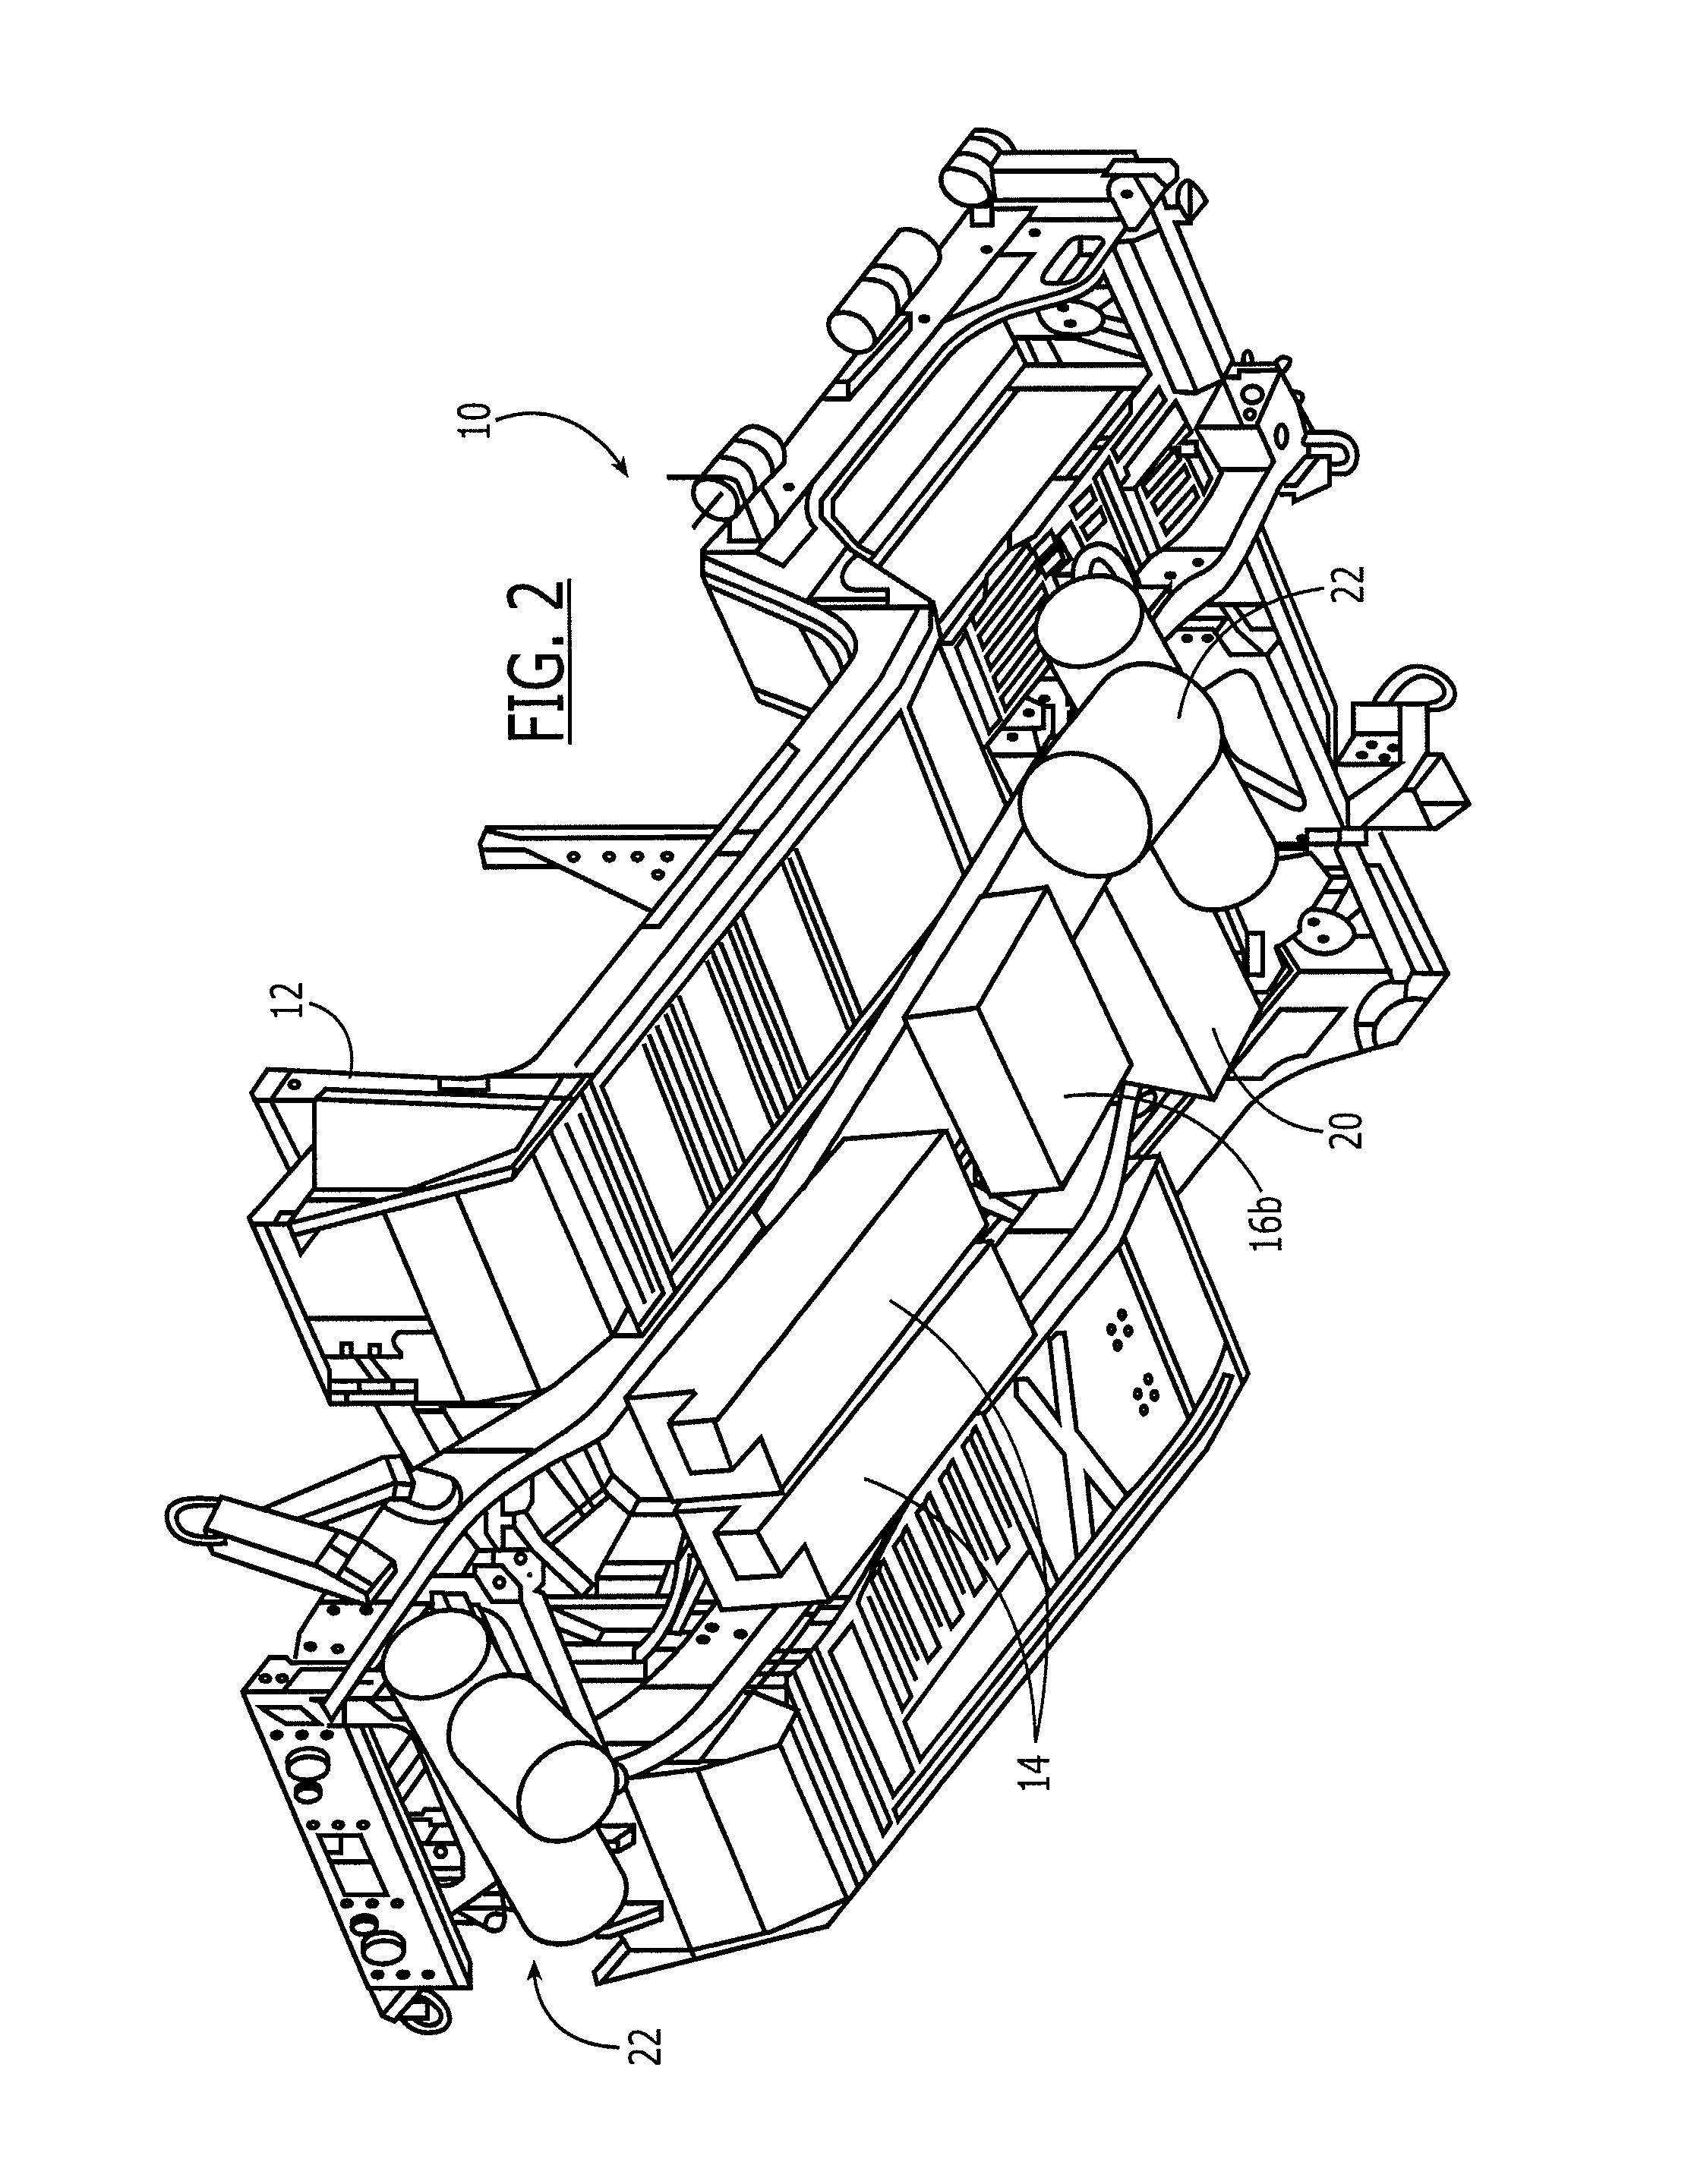 Modular vehicle and associated method of construction